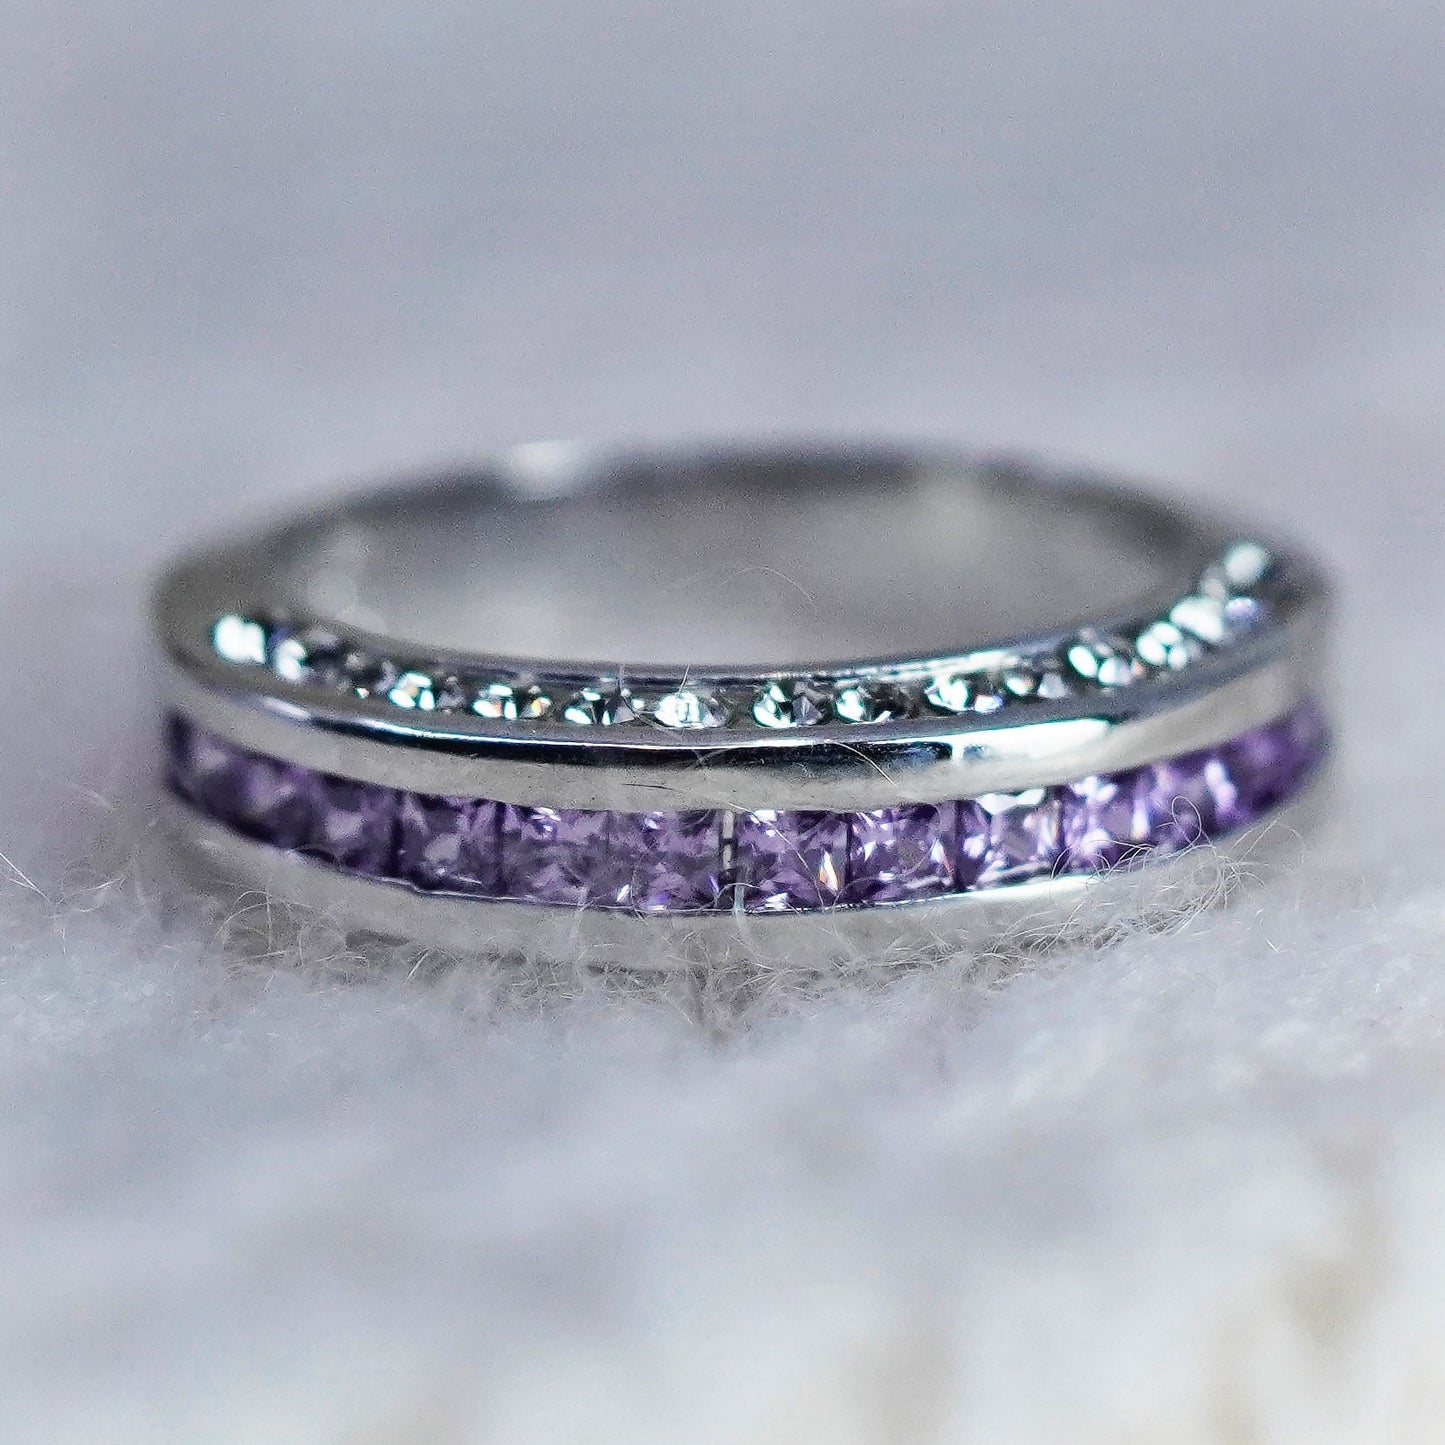 Size 6.75, vintage Sterling silver cocktail ring, 925 band w/ cluster amethyst